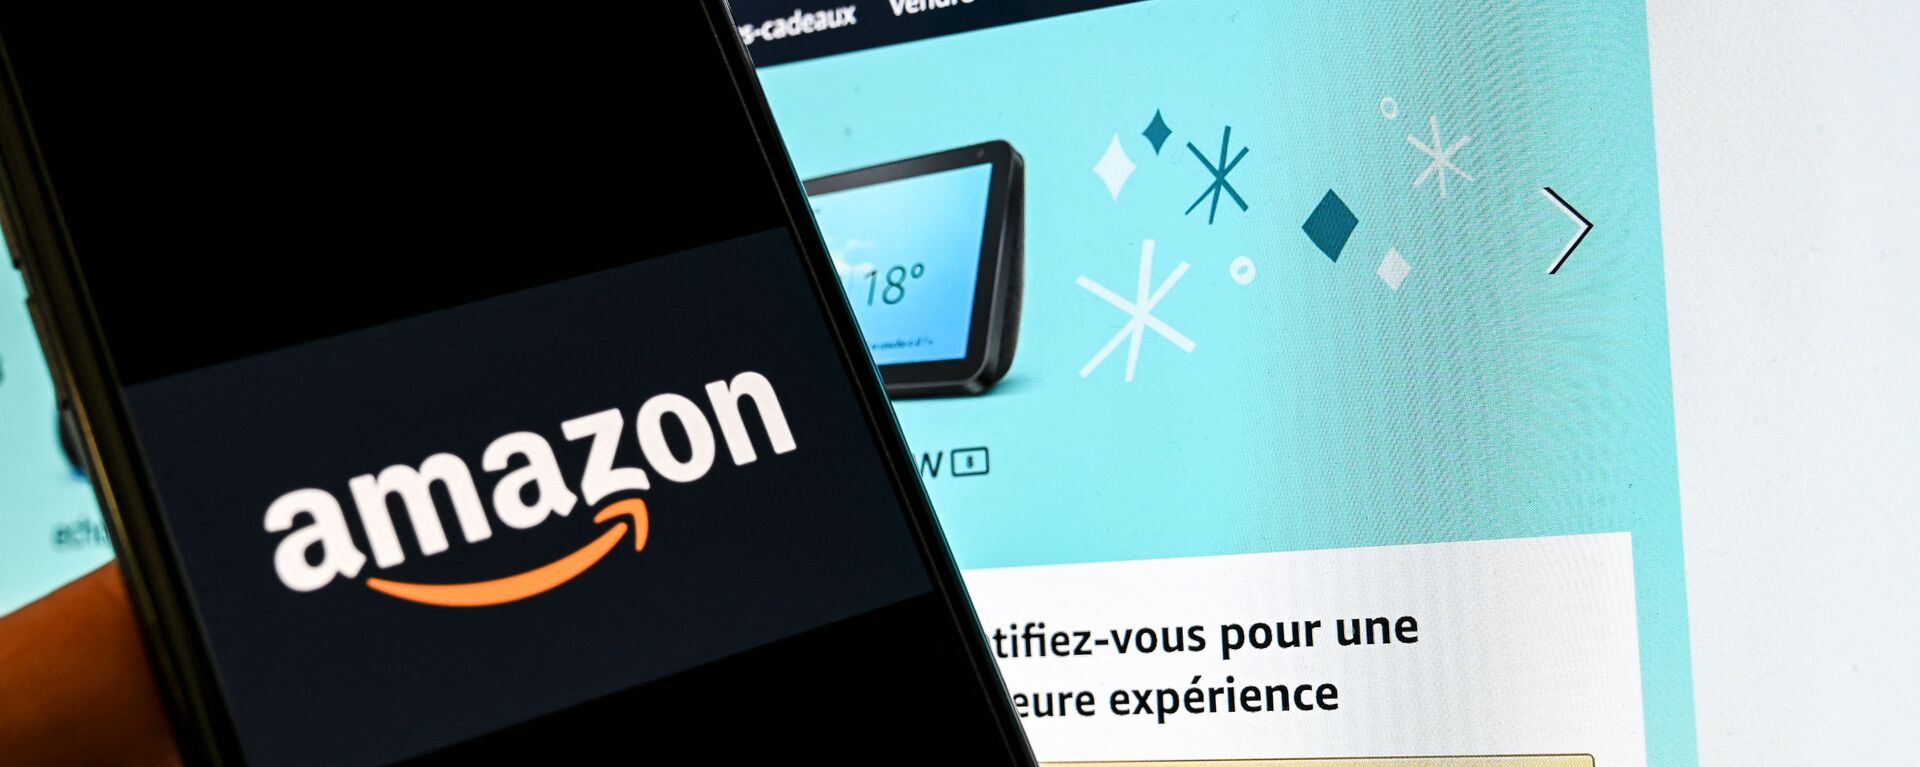 In this photograph taken on November 18, 2020 in Lille, a person poses with a smartphone showing an Amazon logo, in front of a computer screen displaying the home page of Amazon France sales website. - Sputnik International, 1920, 30.07.2021